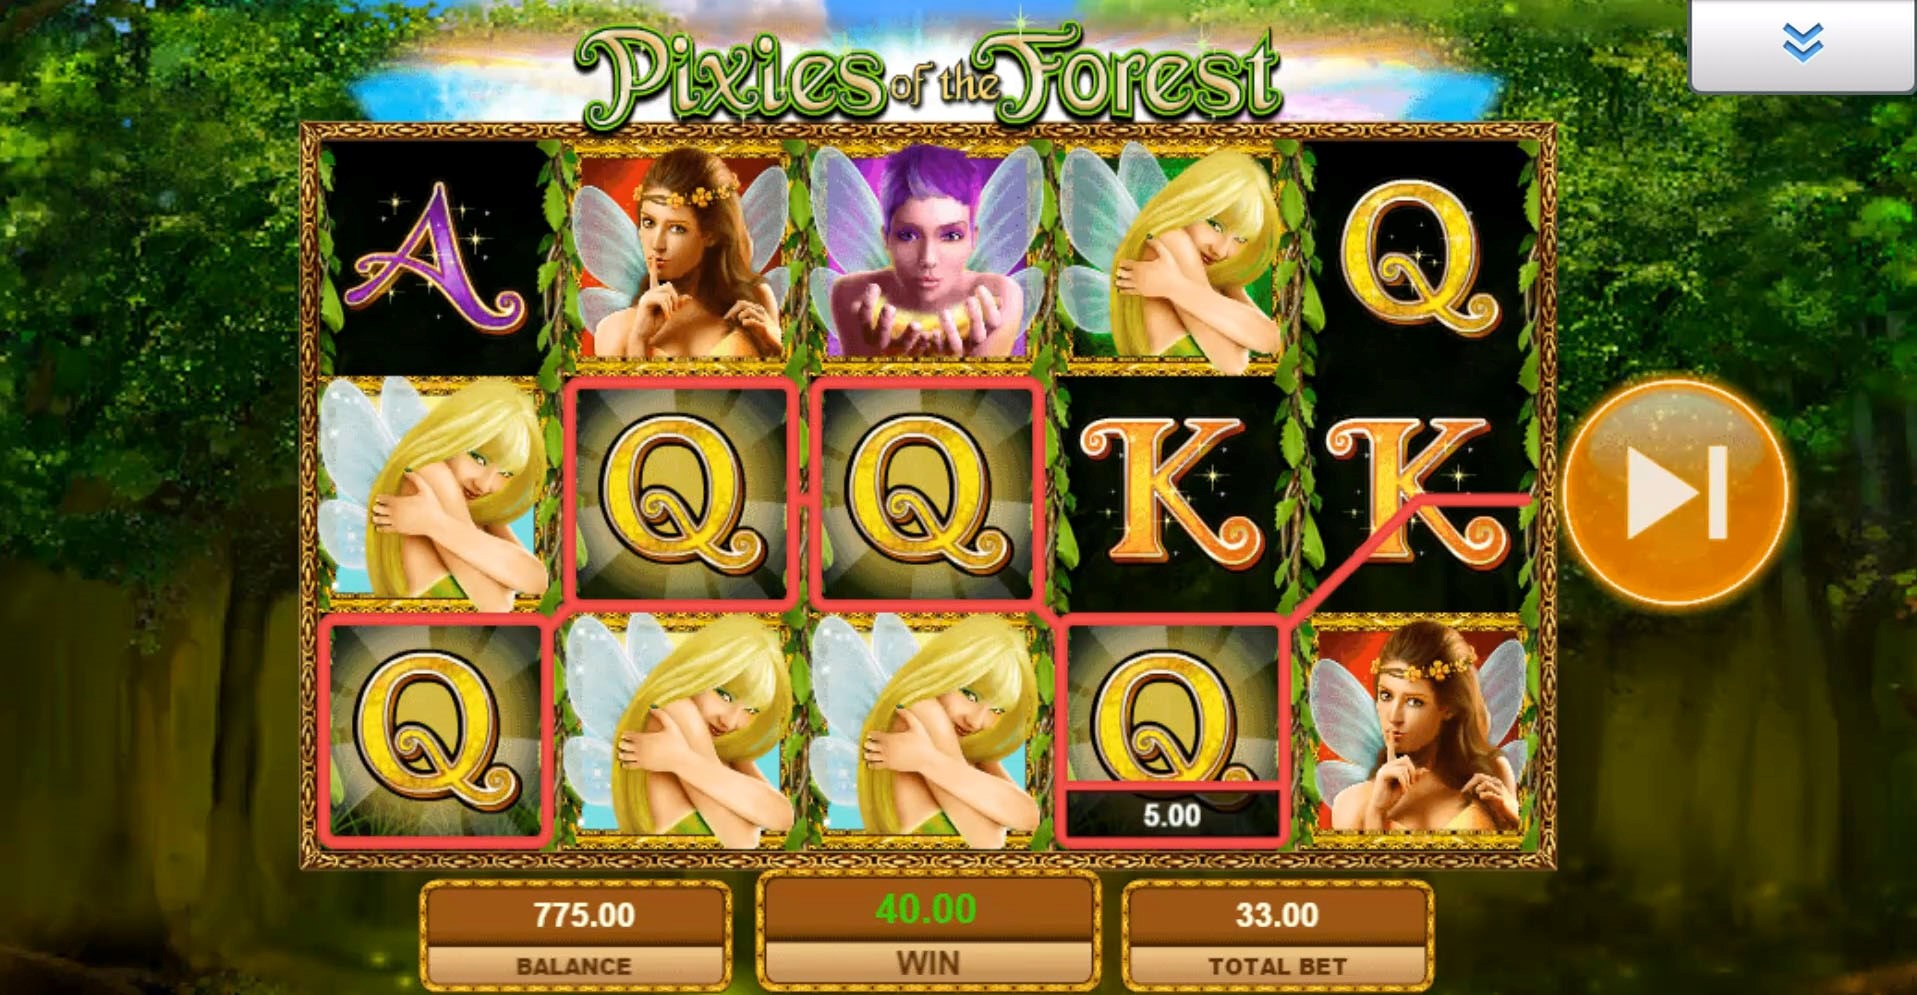 Pixies of the Forest mobile slot game from IGT produces multi-line win